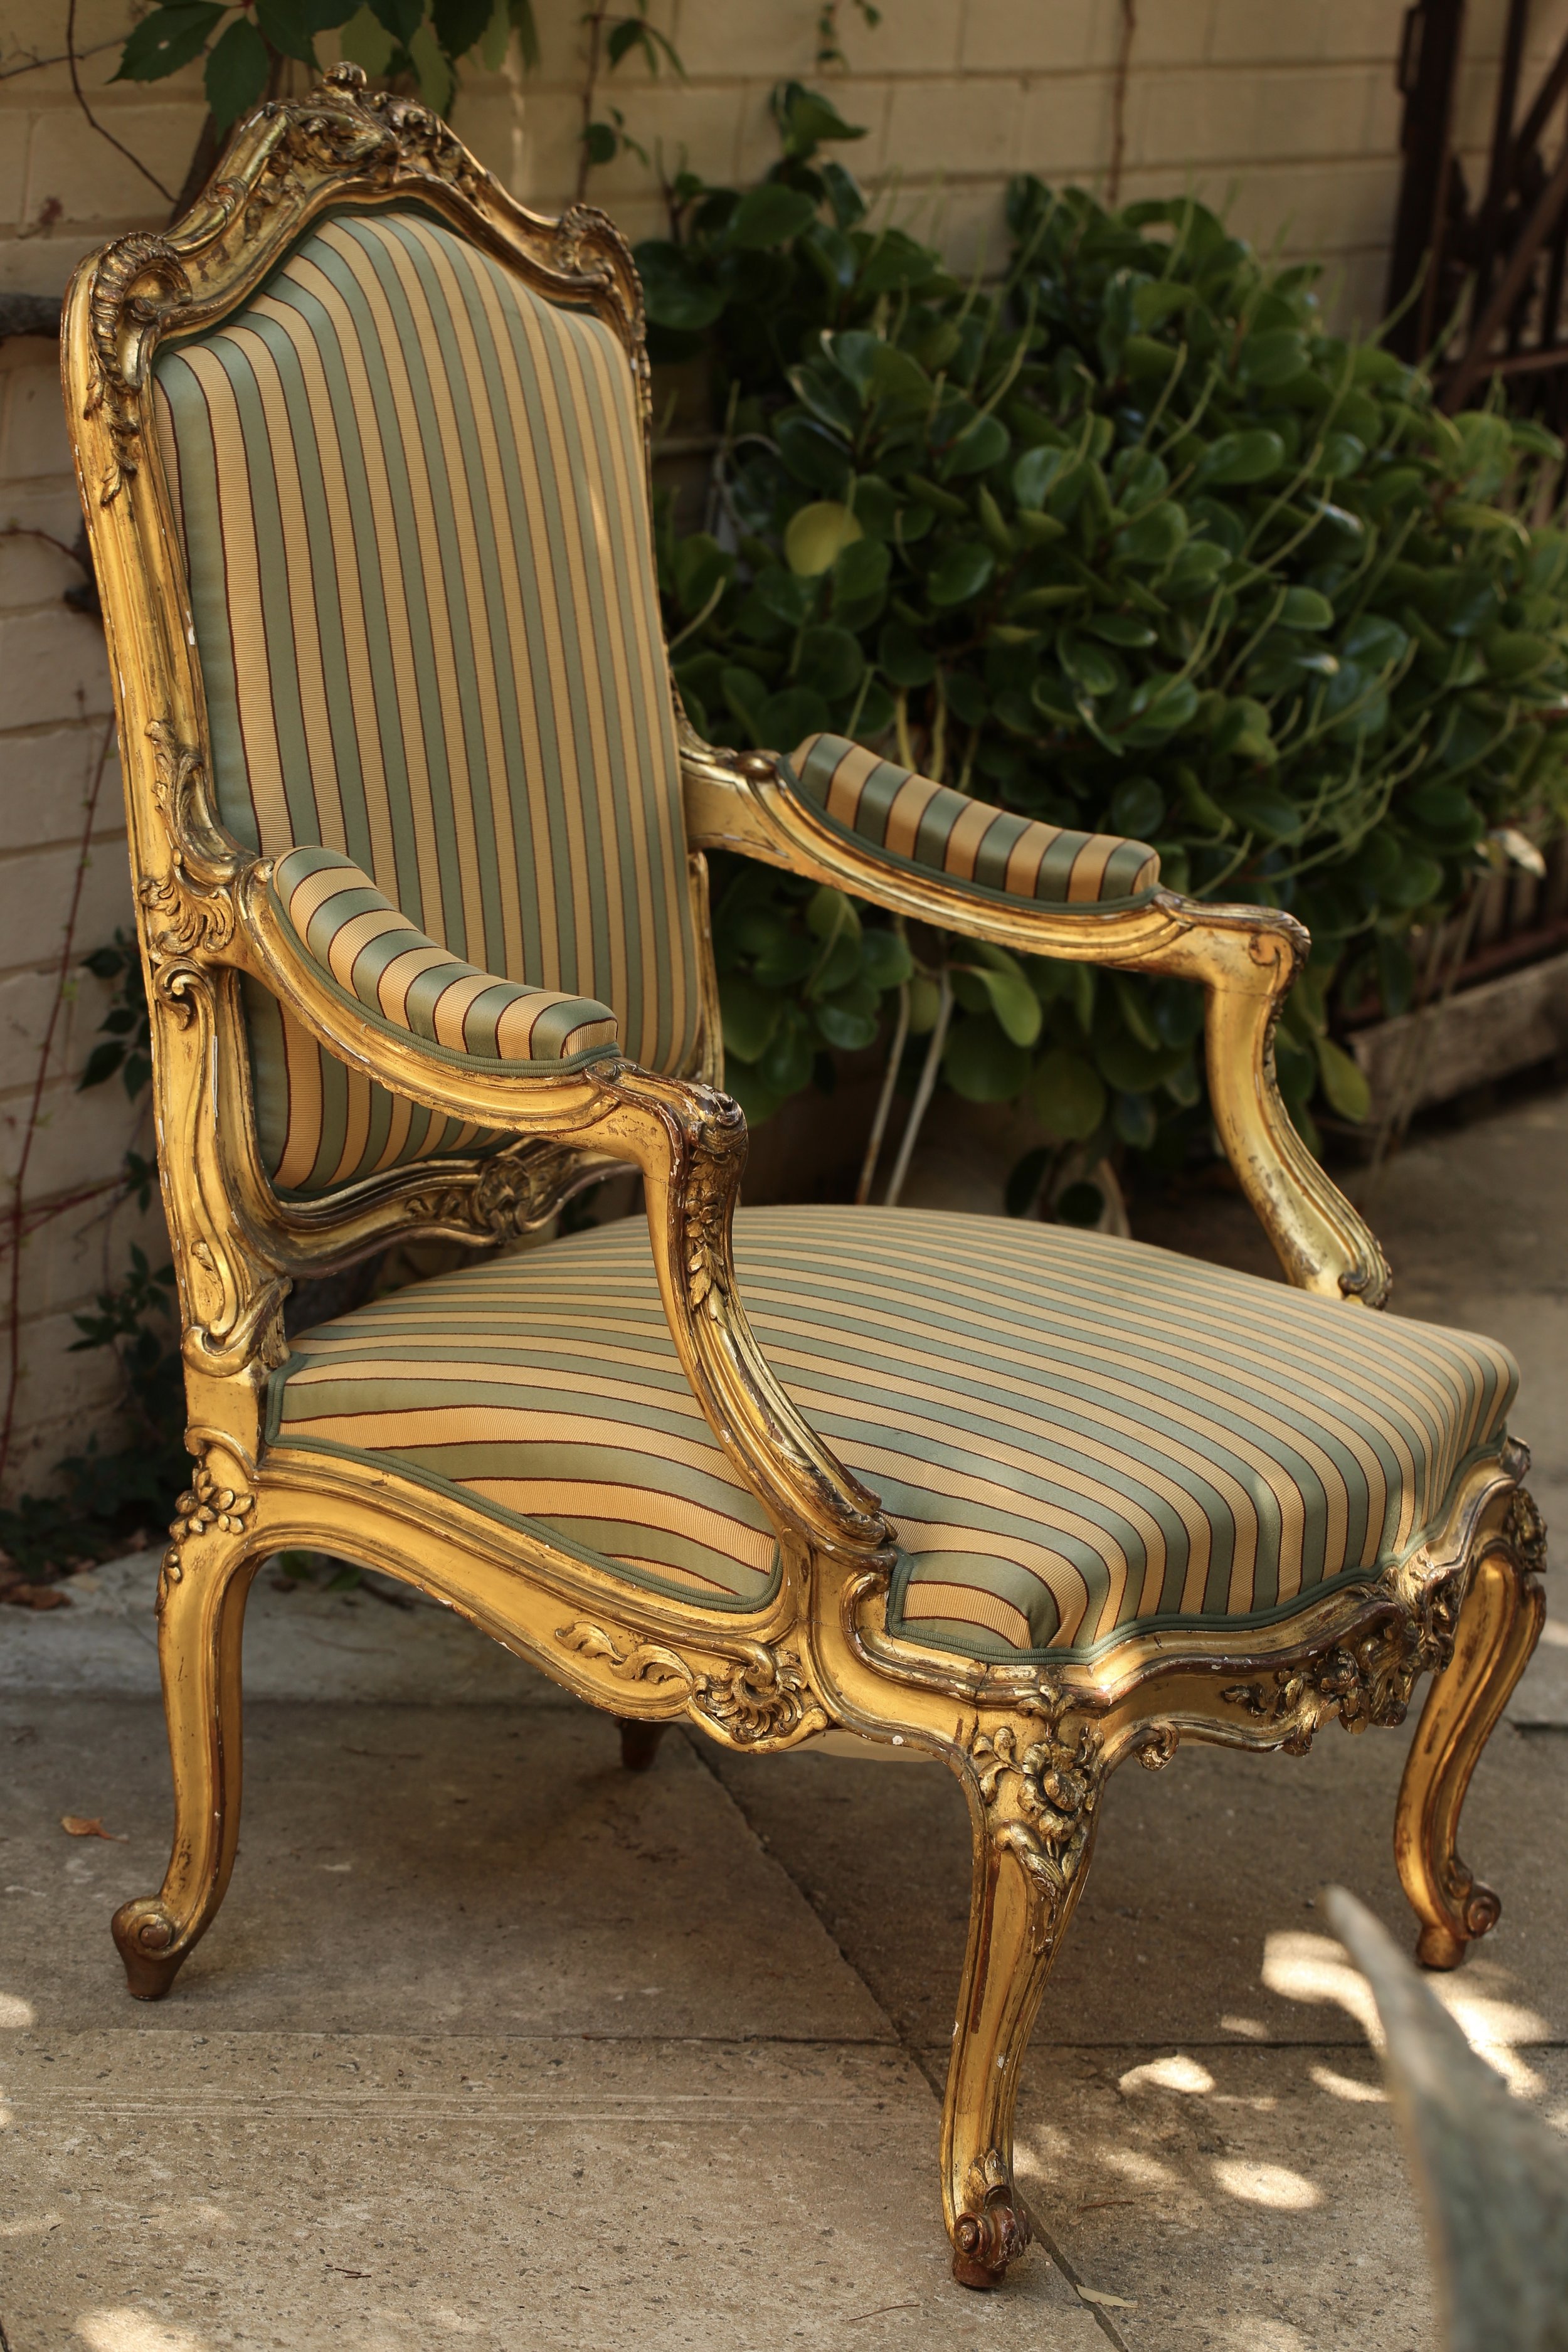 Giltwood Louis XV fauteuil (armchair) with neoclassical details 1765 (via  Mallett Antiques)